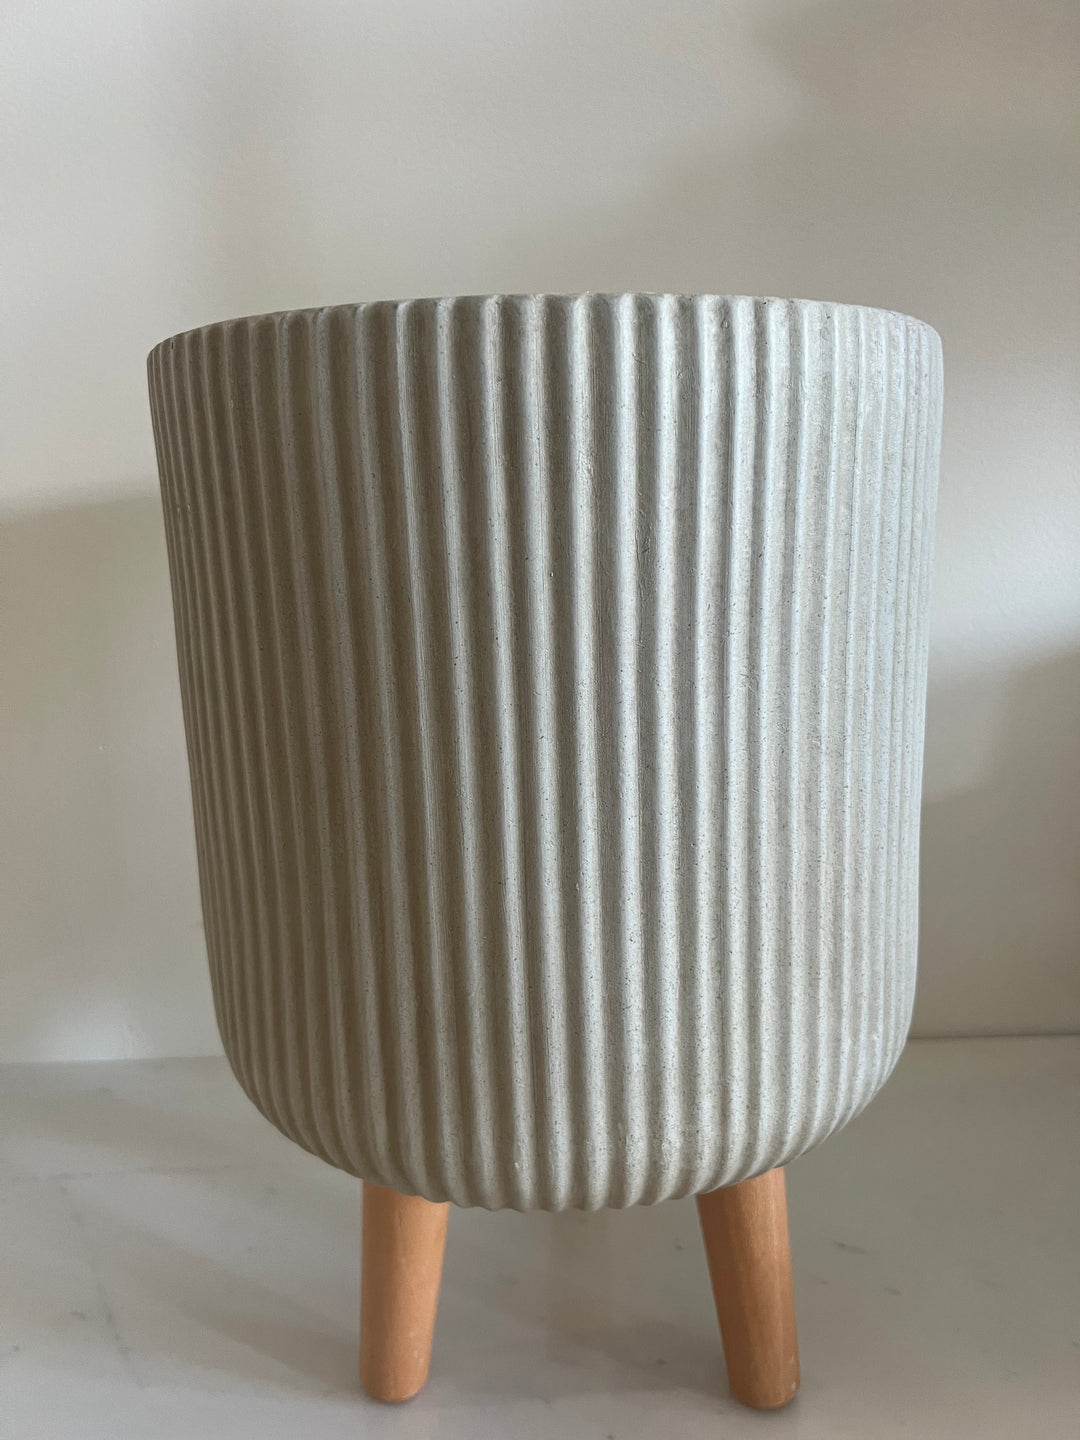 Grey Ribbed Pot with Wooden Legs